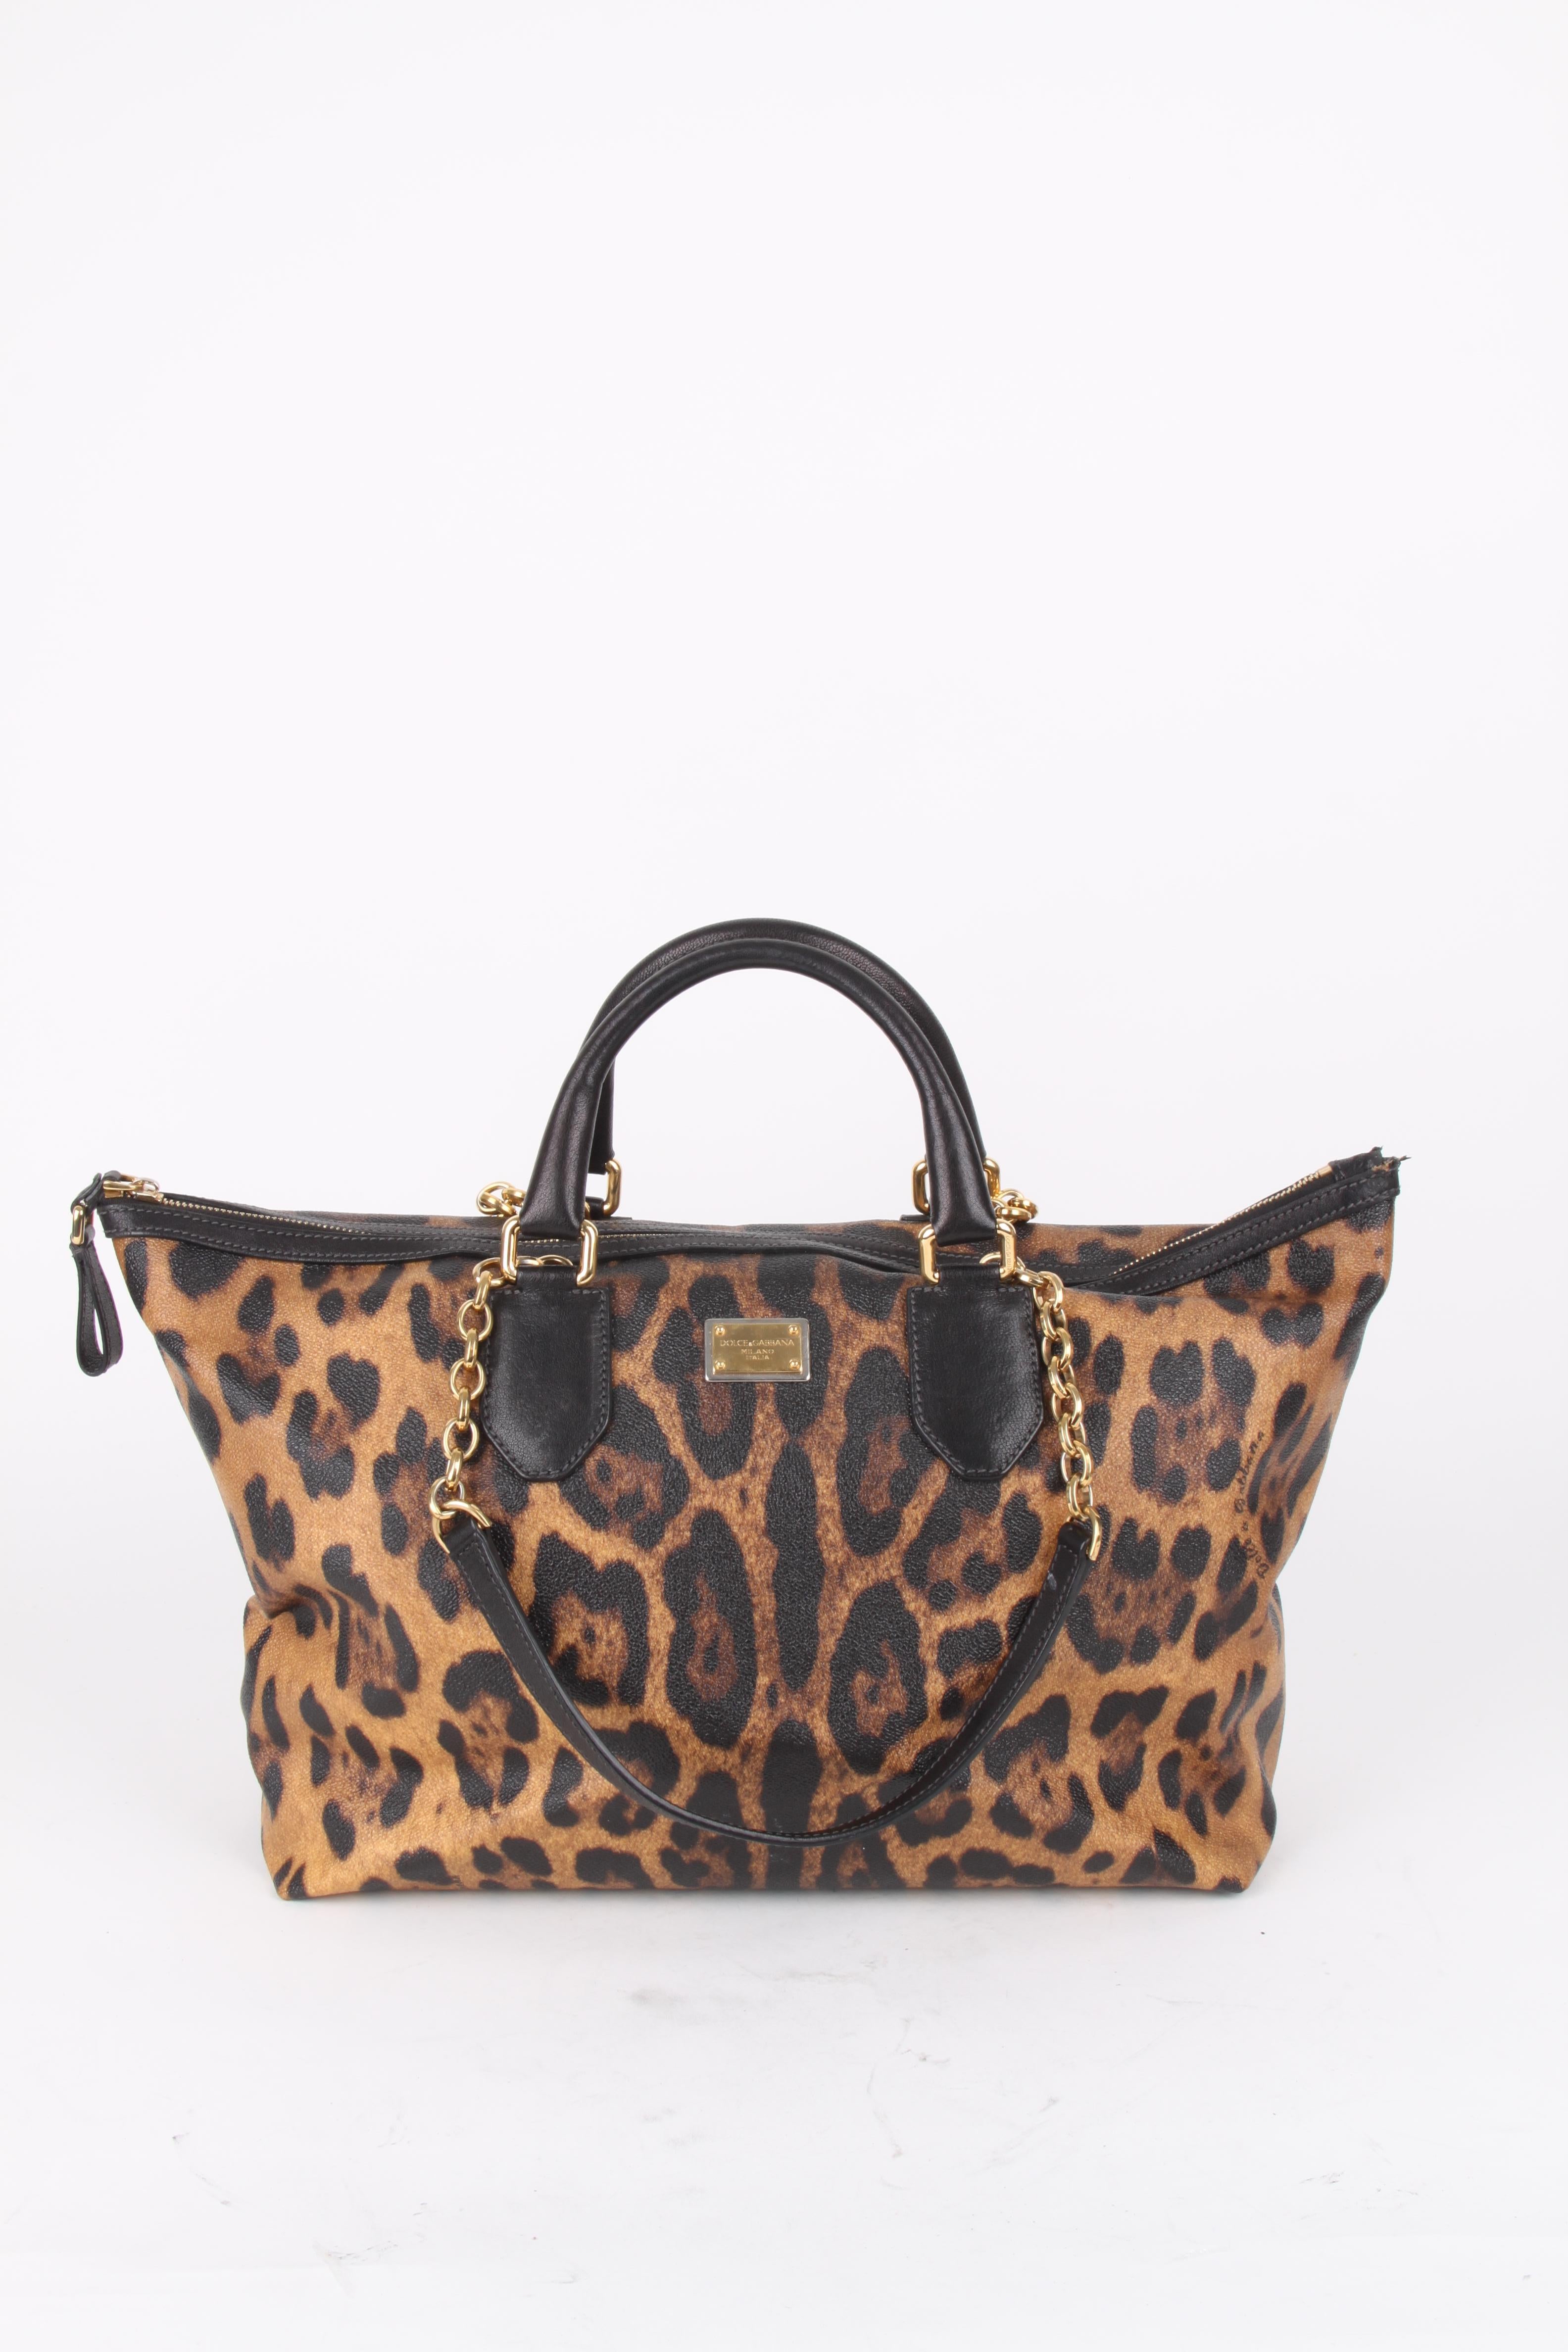 Dolce and Gabbana Brown Canvas Leather Leopard Print Handbag.

This little bag makes a big statement. It features a canvas exterior with matching brown leather handles. The bag features a black cotton lining, zipper closure, one main compartment and